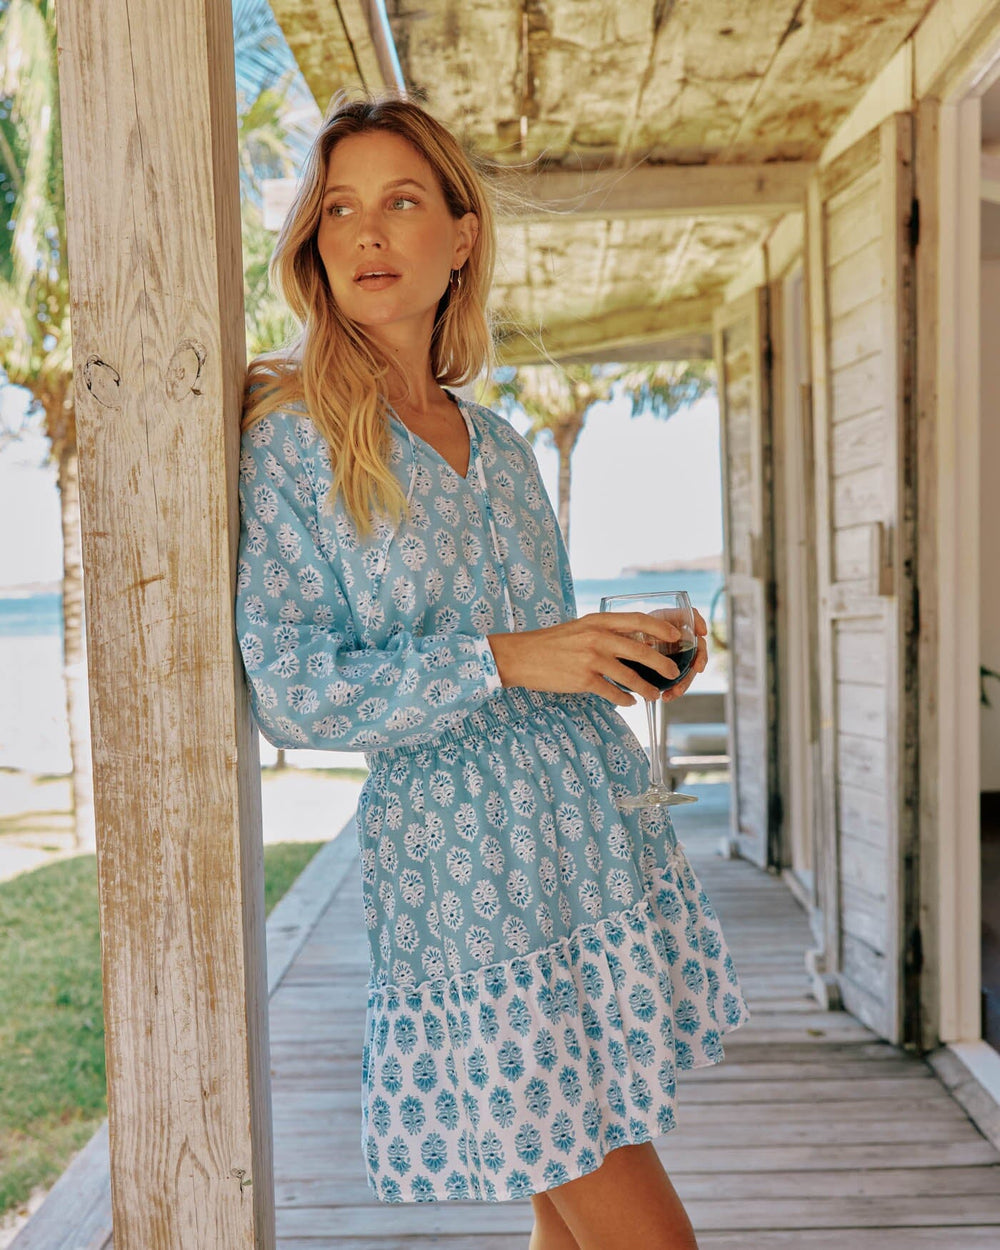 The front view of the Southern Tide Kinsey Garden Variety Printed Top by Southern Tide - Clearwater Blue